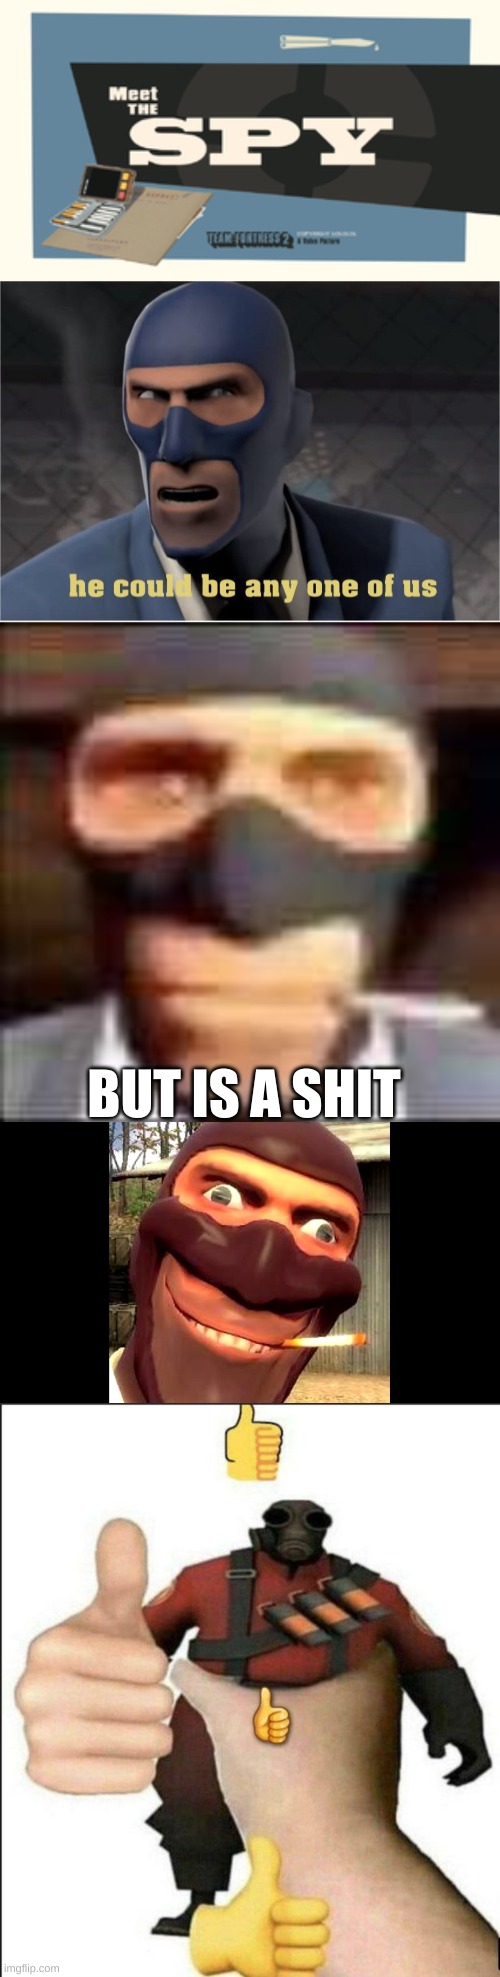 meet the spi | BUT IS A SHIT | image tagged in meet the spy,he could be anyone of us,spi,tf2 spy,pyro thumbs up,funny | made w/ Imgflip meme maker